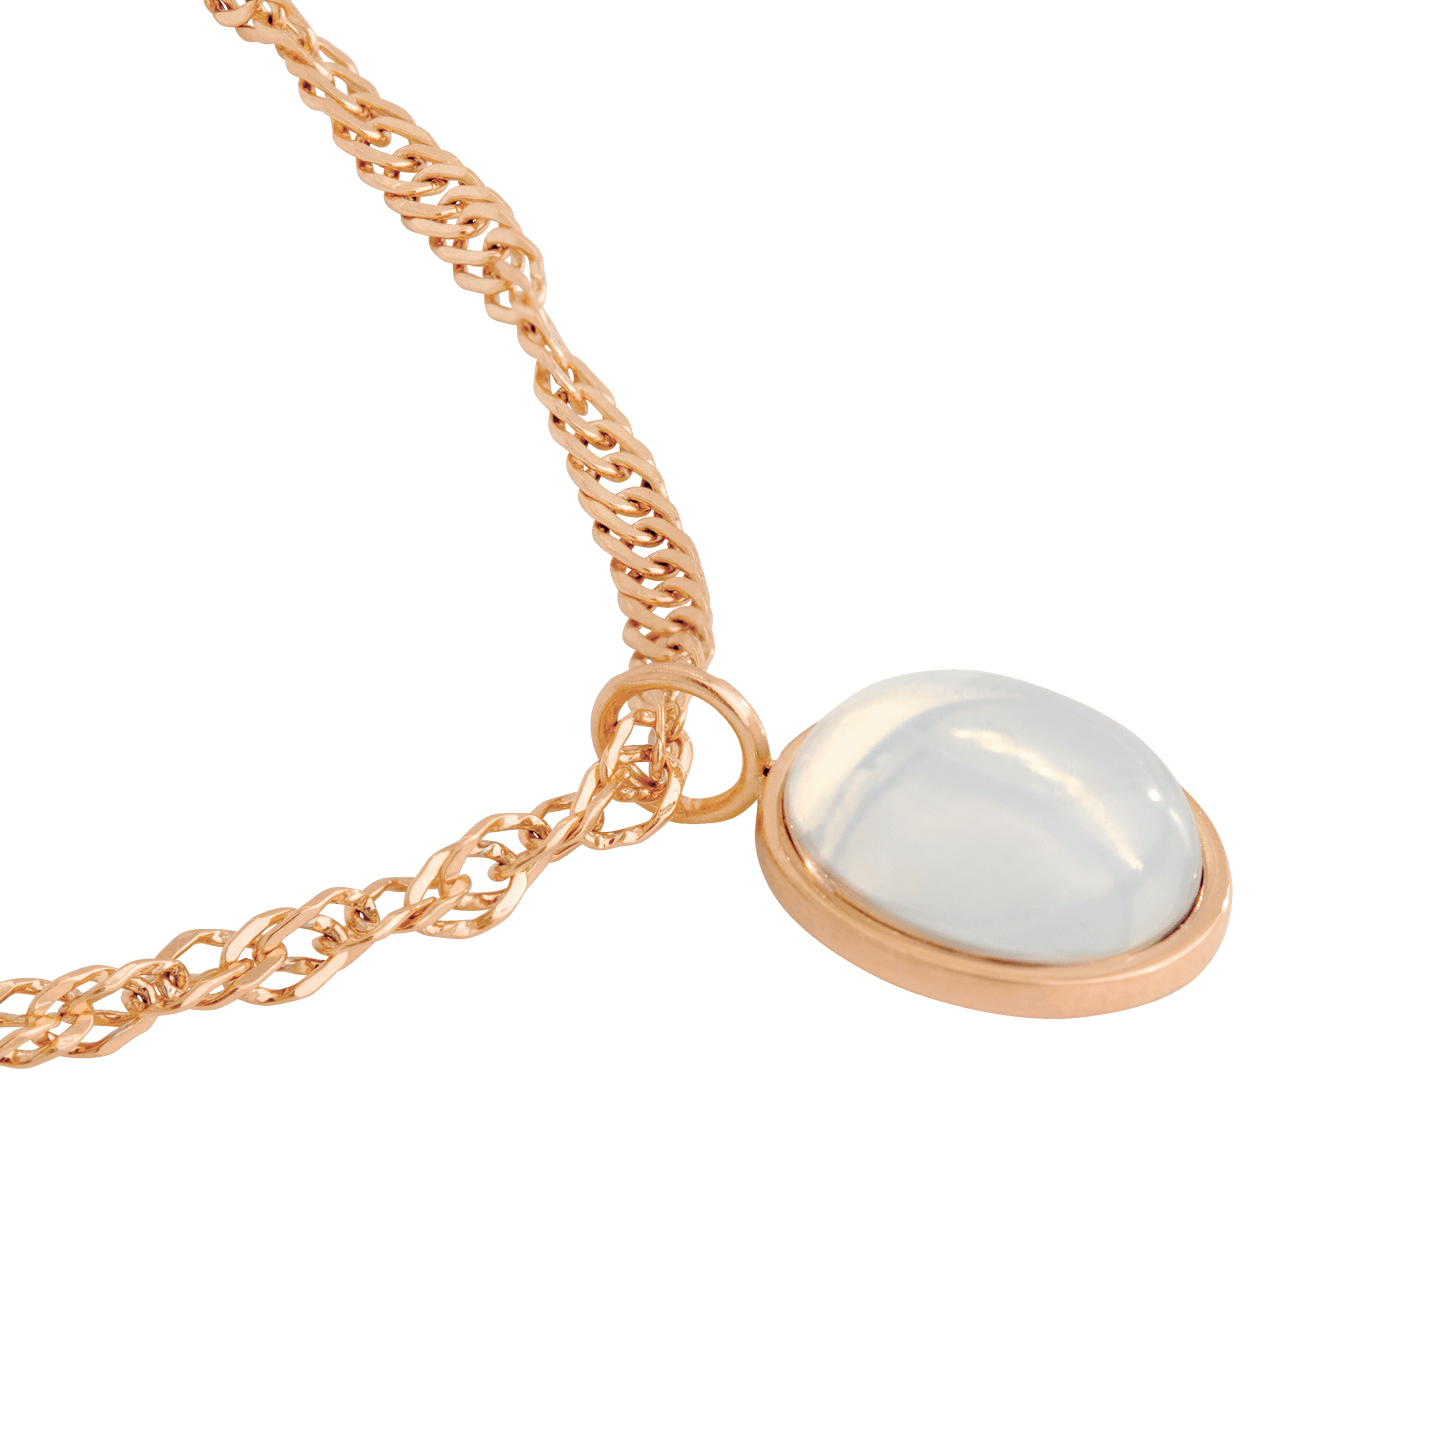 Oval Pendant Necklace Rose Gold